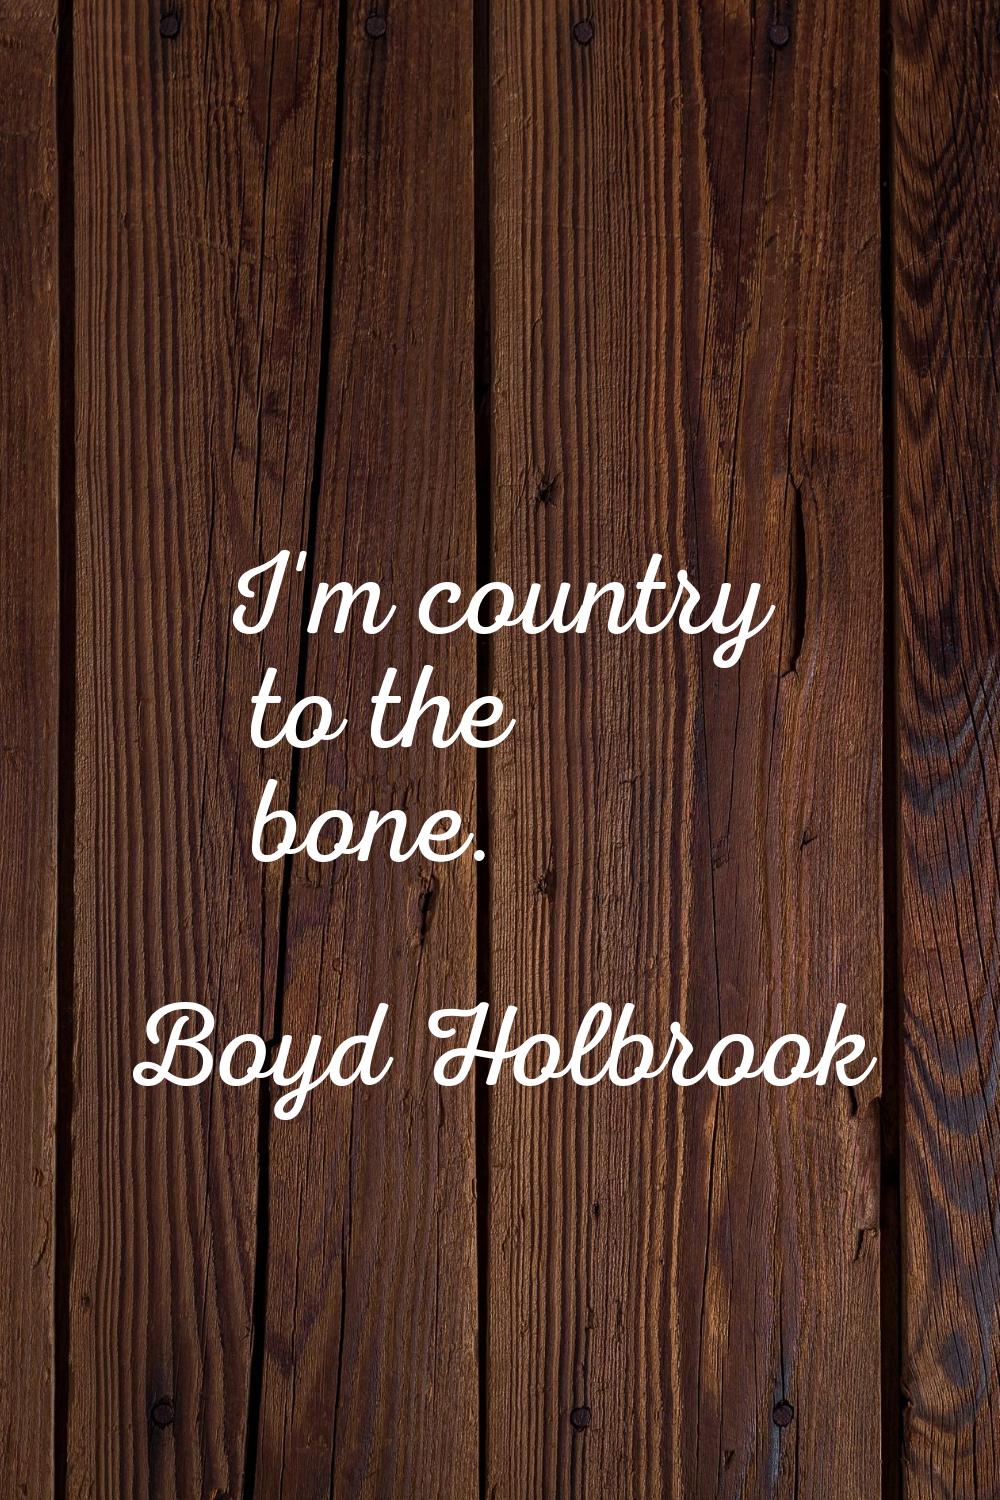 I'm country to the bone.